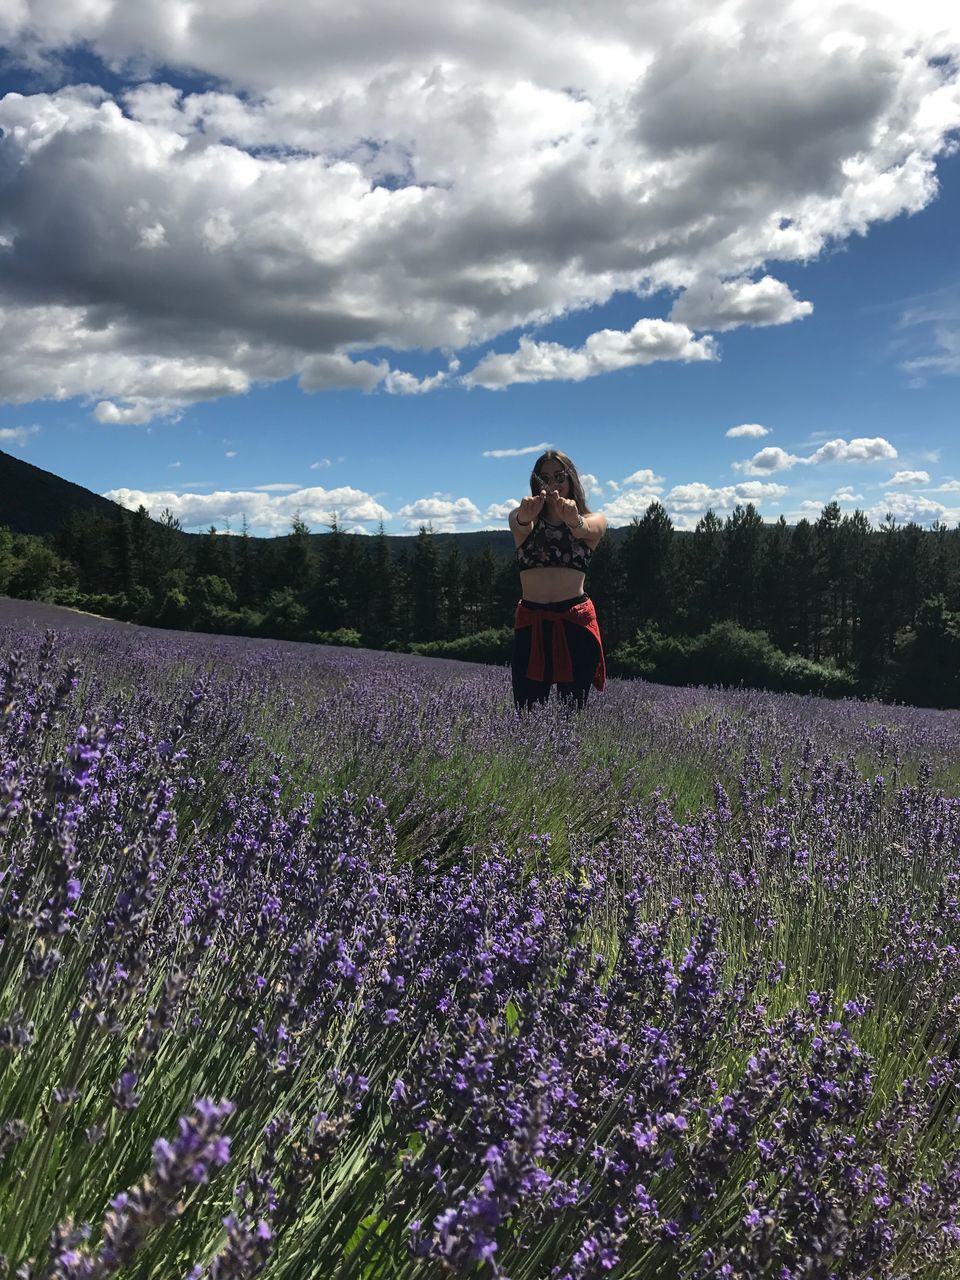 flower, nature, field, real people, growth, purple, rear view, lavender, sky, cloud - sky, one person, beauty in nature, leisure activity, day, tranquility, tranquil scene, outdoors, lifestyles, plant, standing, agriculture, landscape, scenics, rural scene, women, young women, fragility, freshness, young adult, people